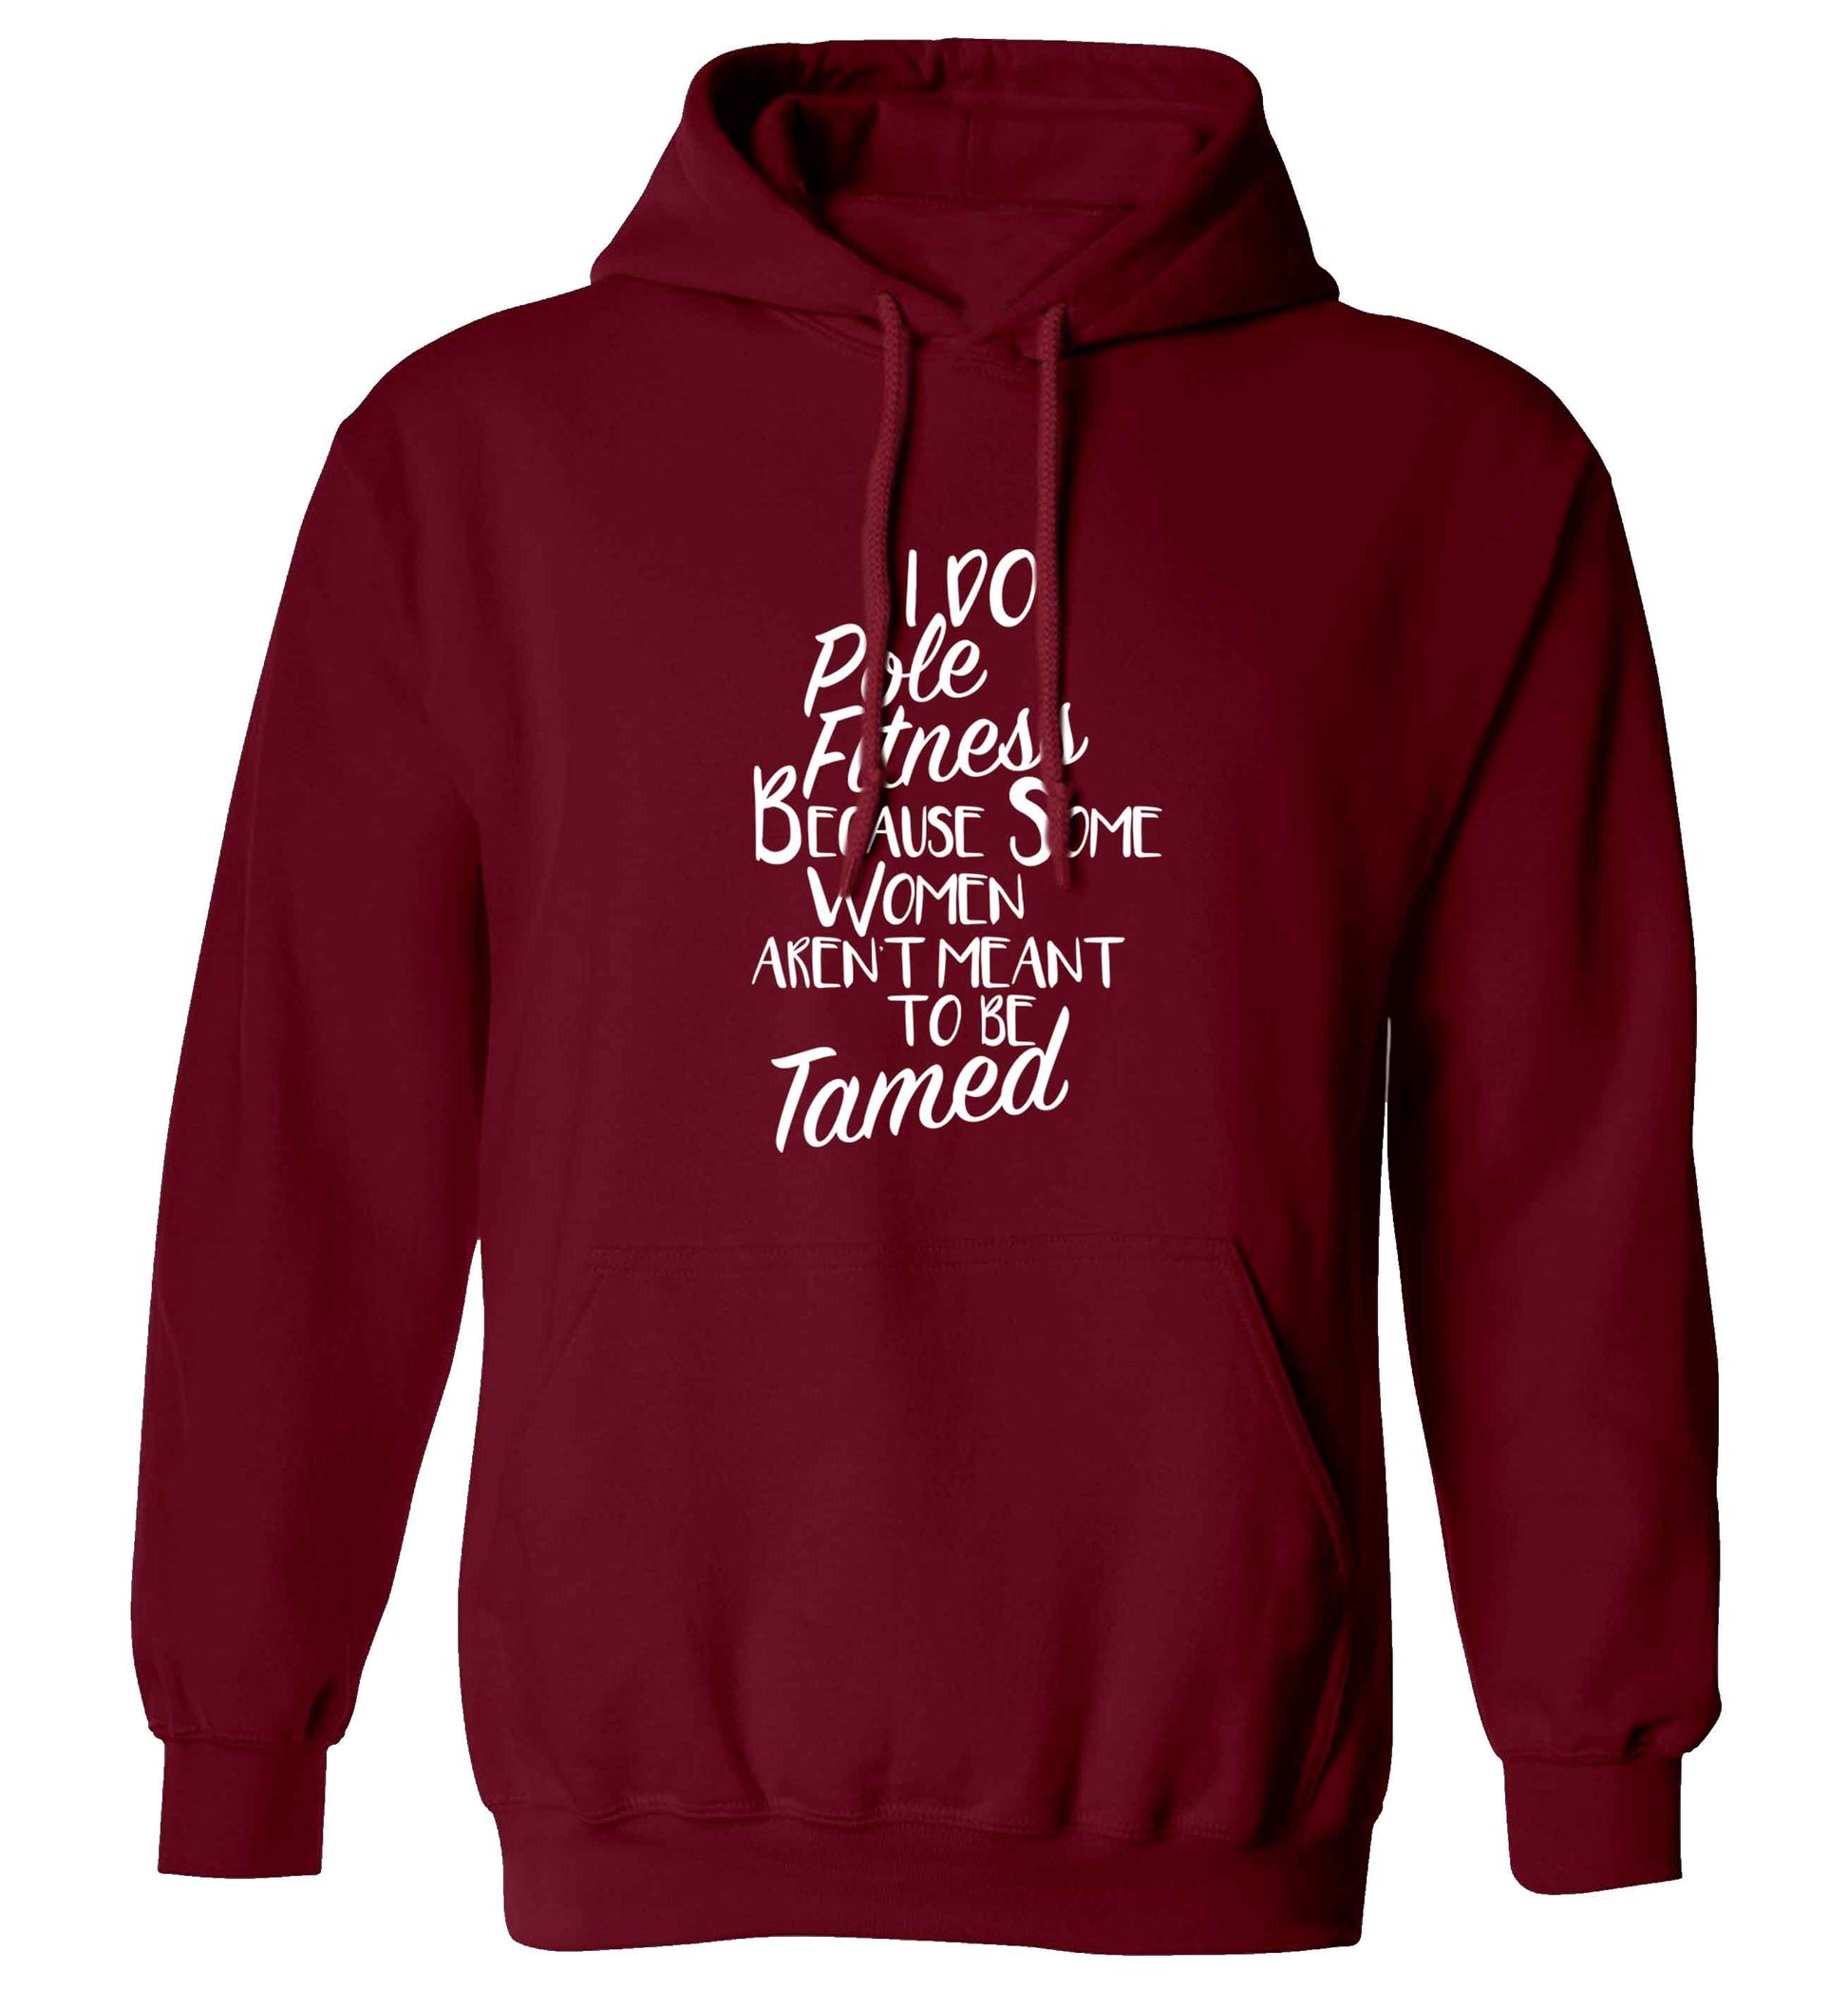 I do pole fitness because some women aren't meant to be tamed adults unisex maroon hoodie 2XL